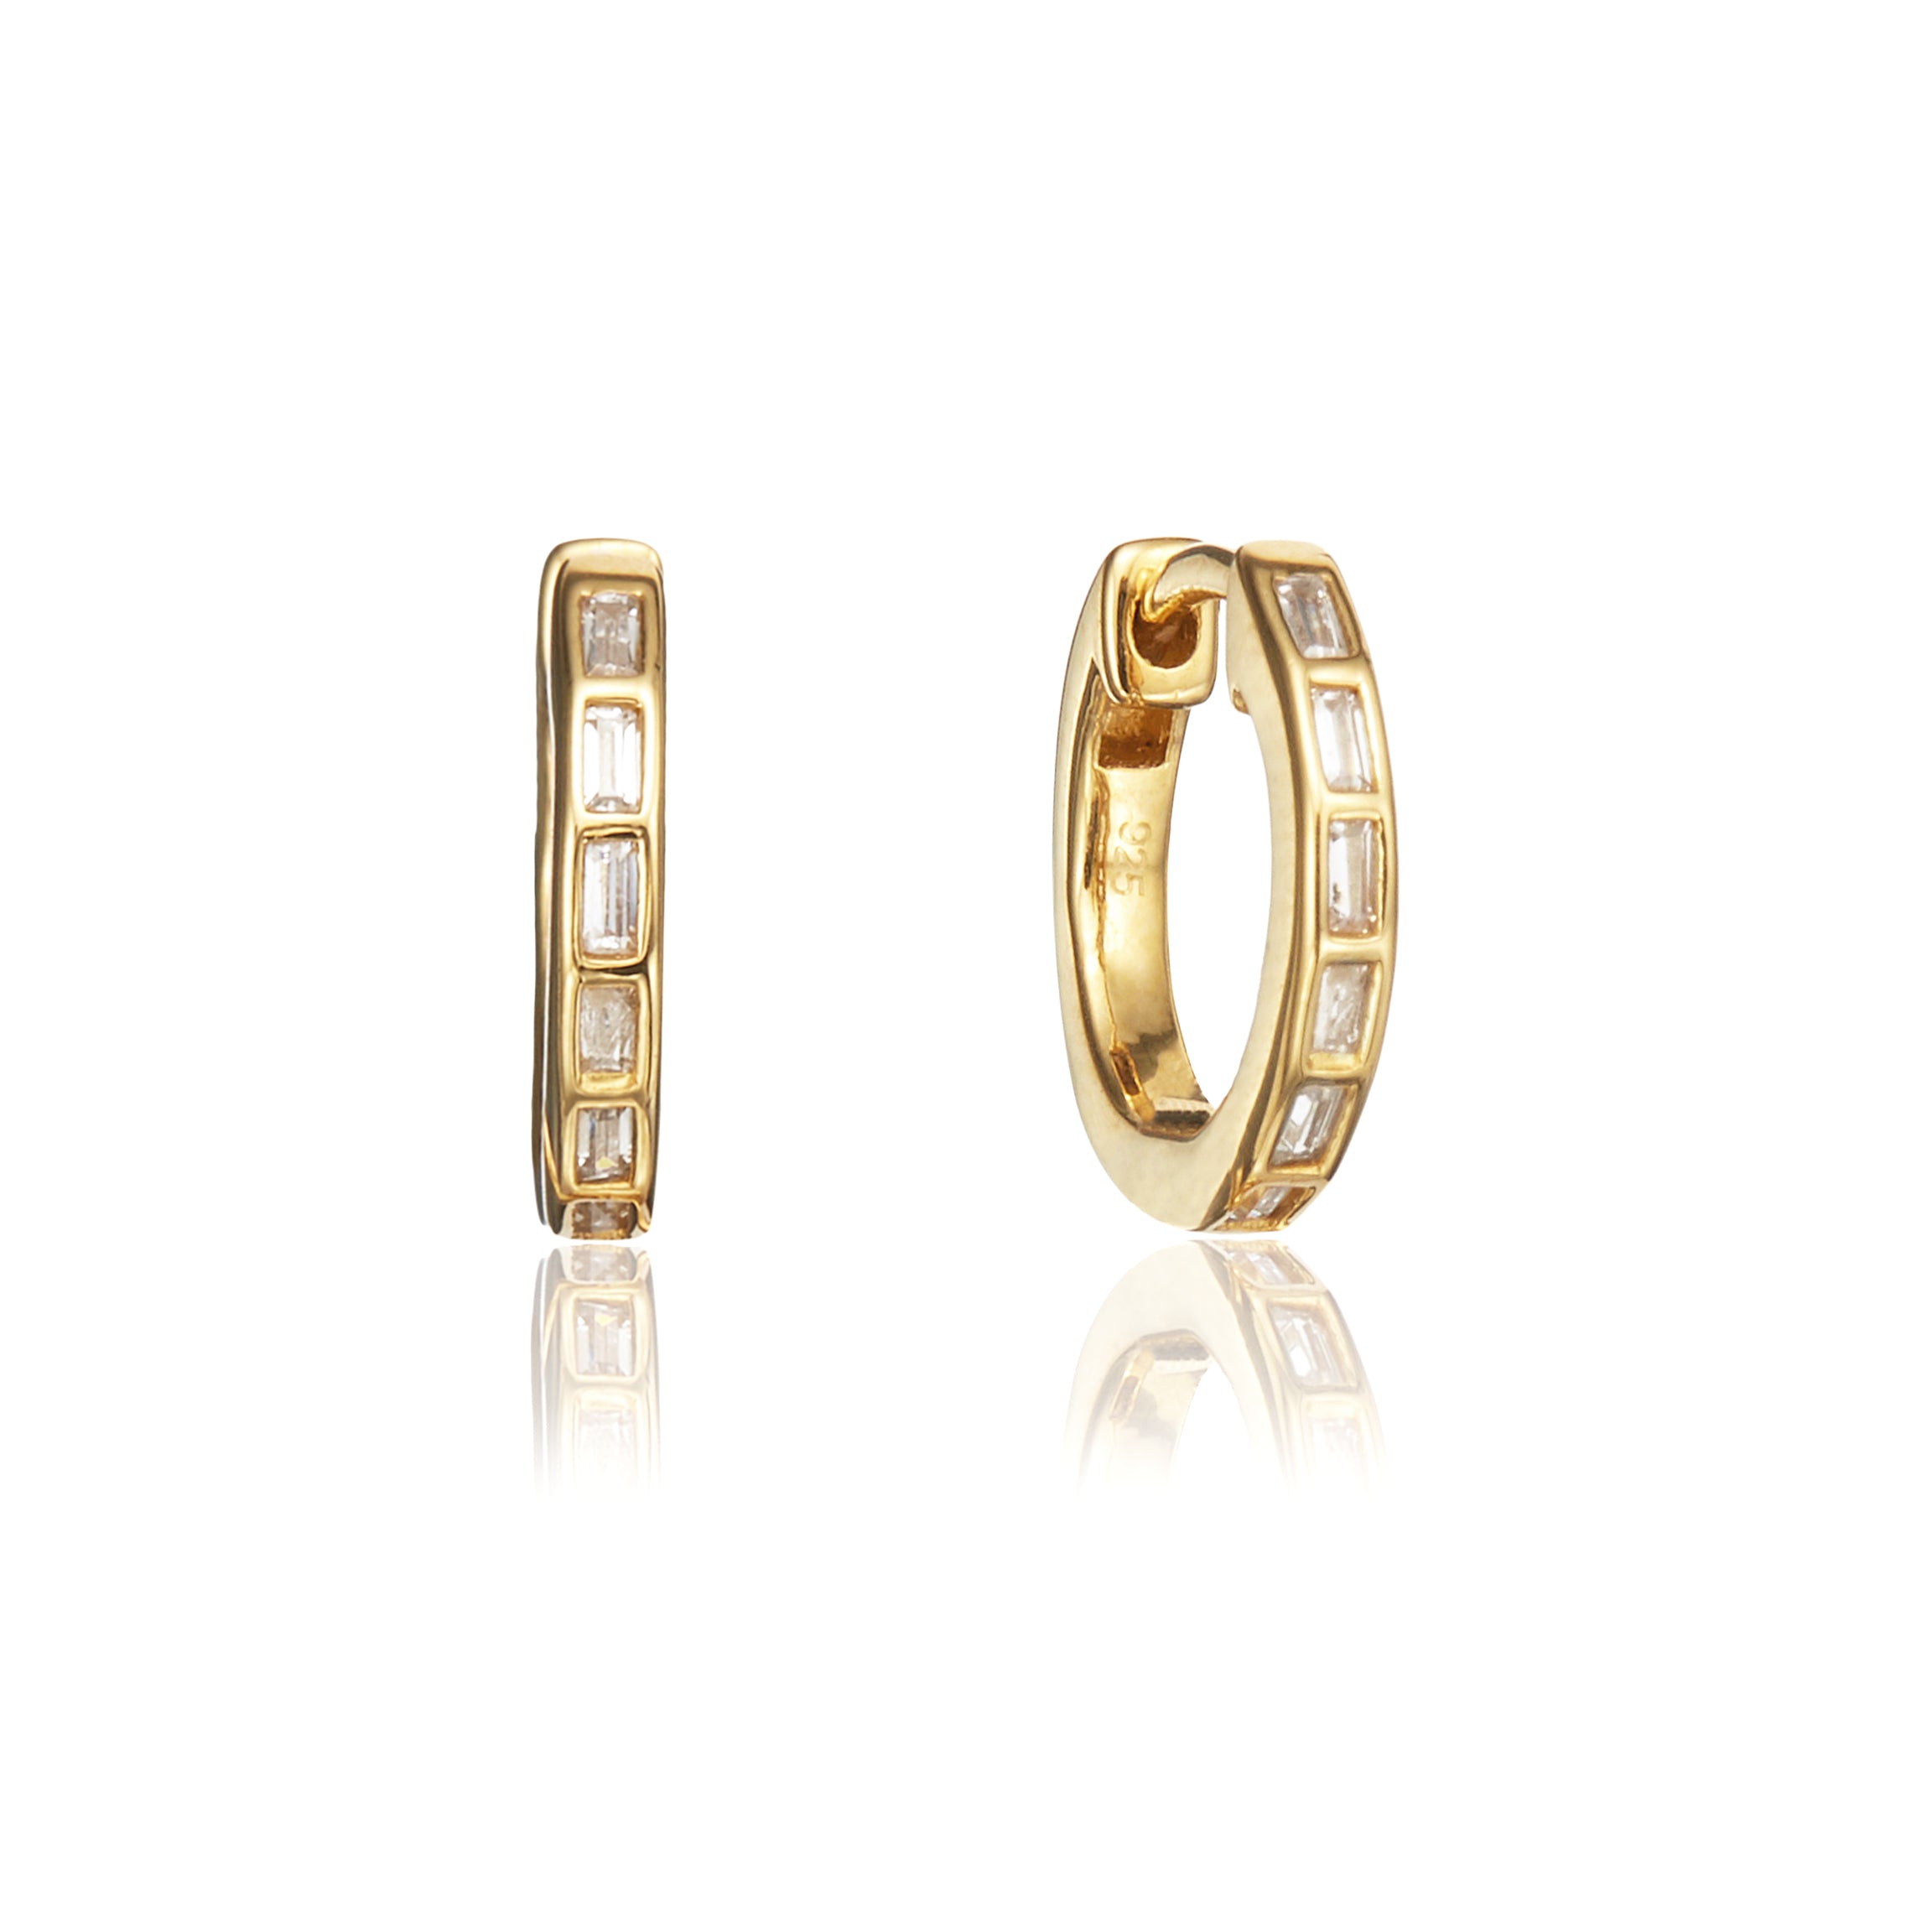 Gold diamond style baguette pearl drop hoop earrings with the pearls removed